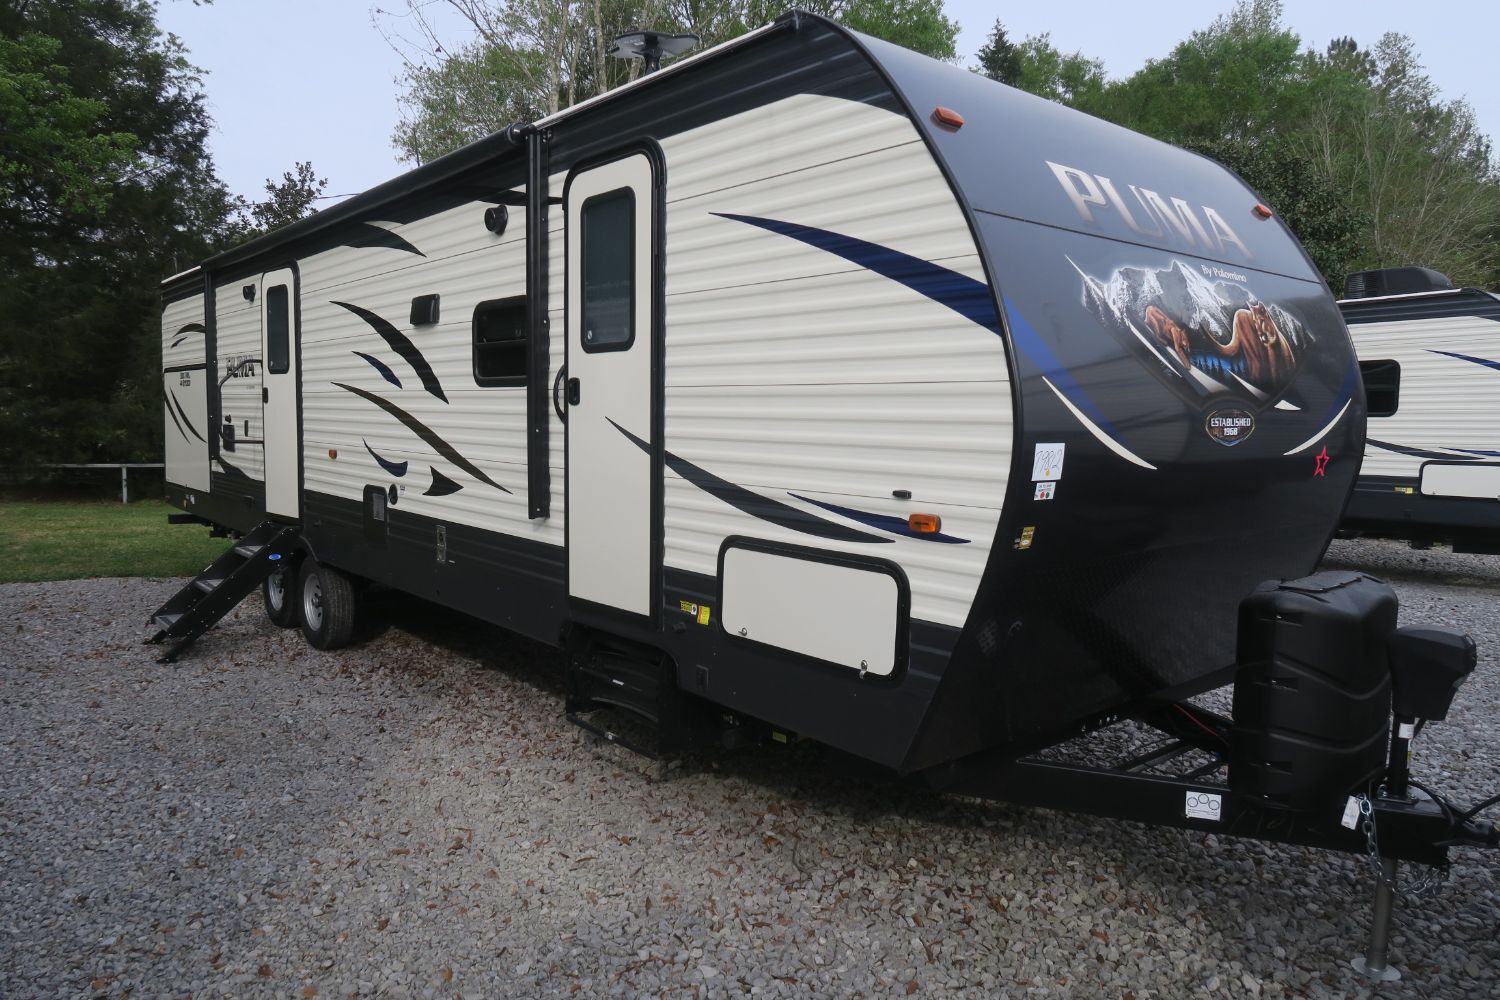 NEW 2019 PUMA 31QBBH - Overview | Berryland Campers